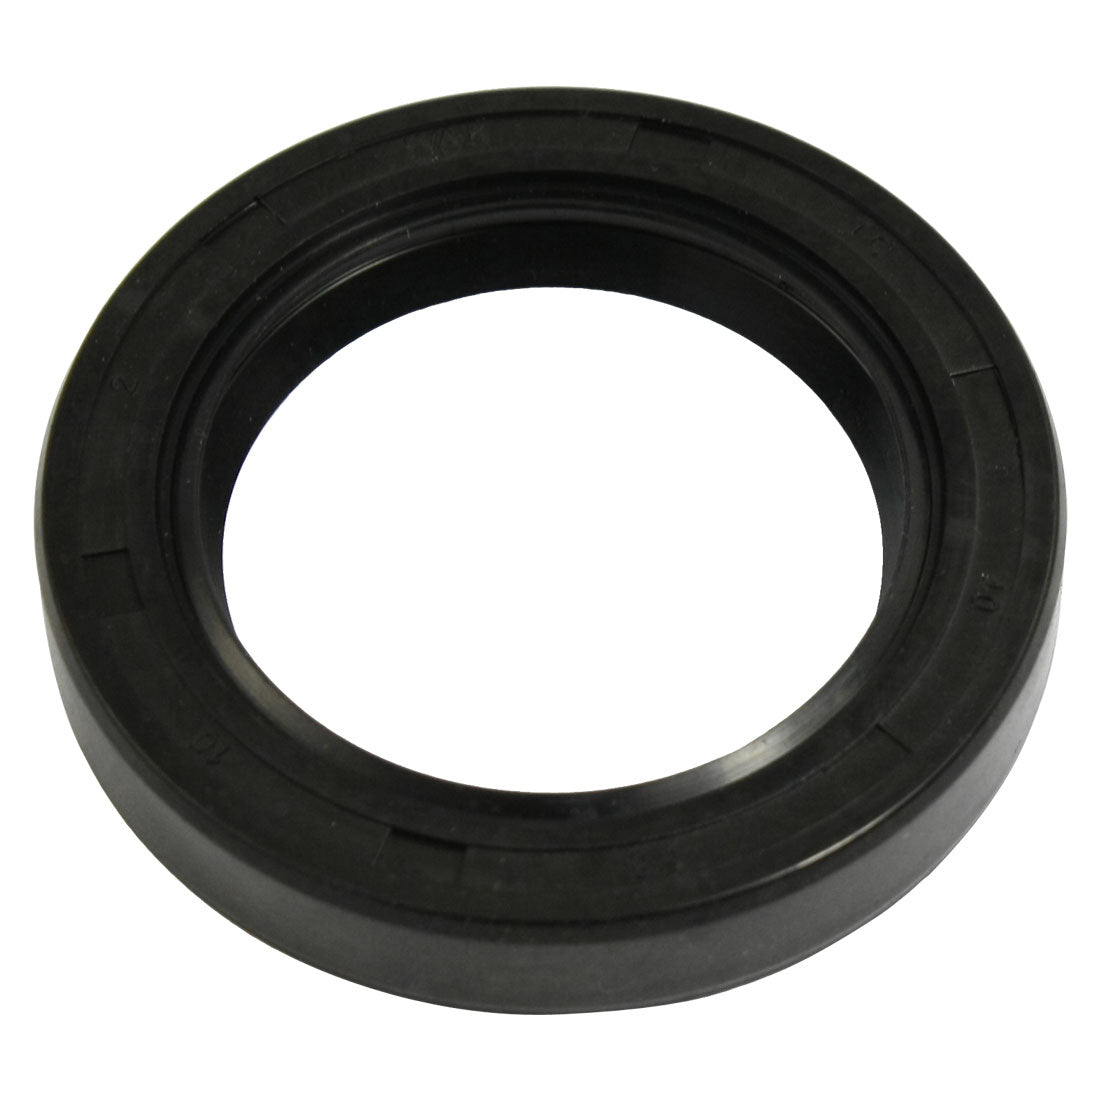 uxcell Uxcell Steel Spring NBR Double Lip TC Oil Shaft Seal 40mm x 58mm x 10mm